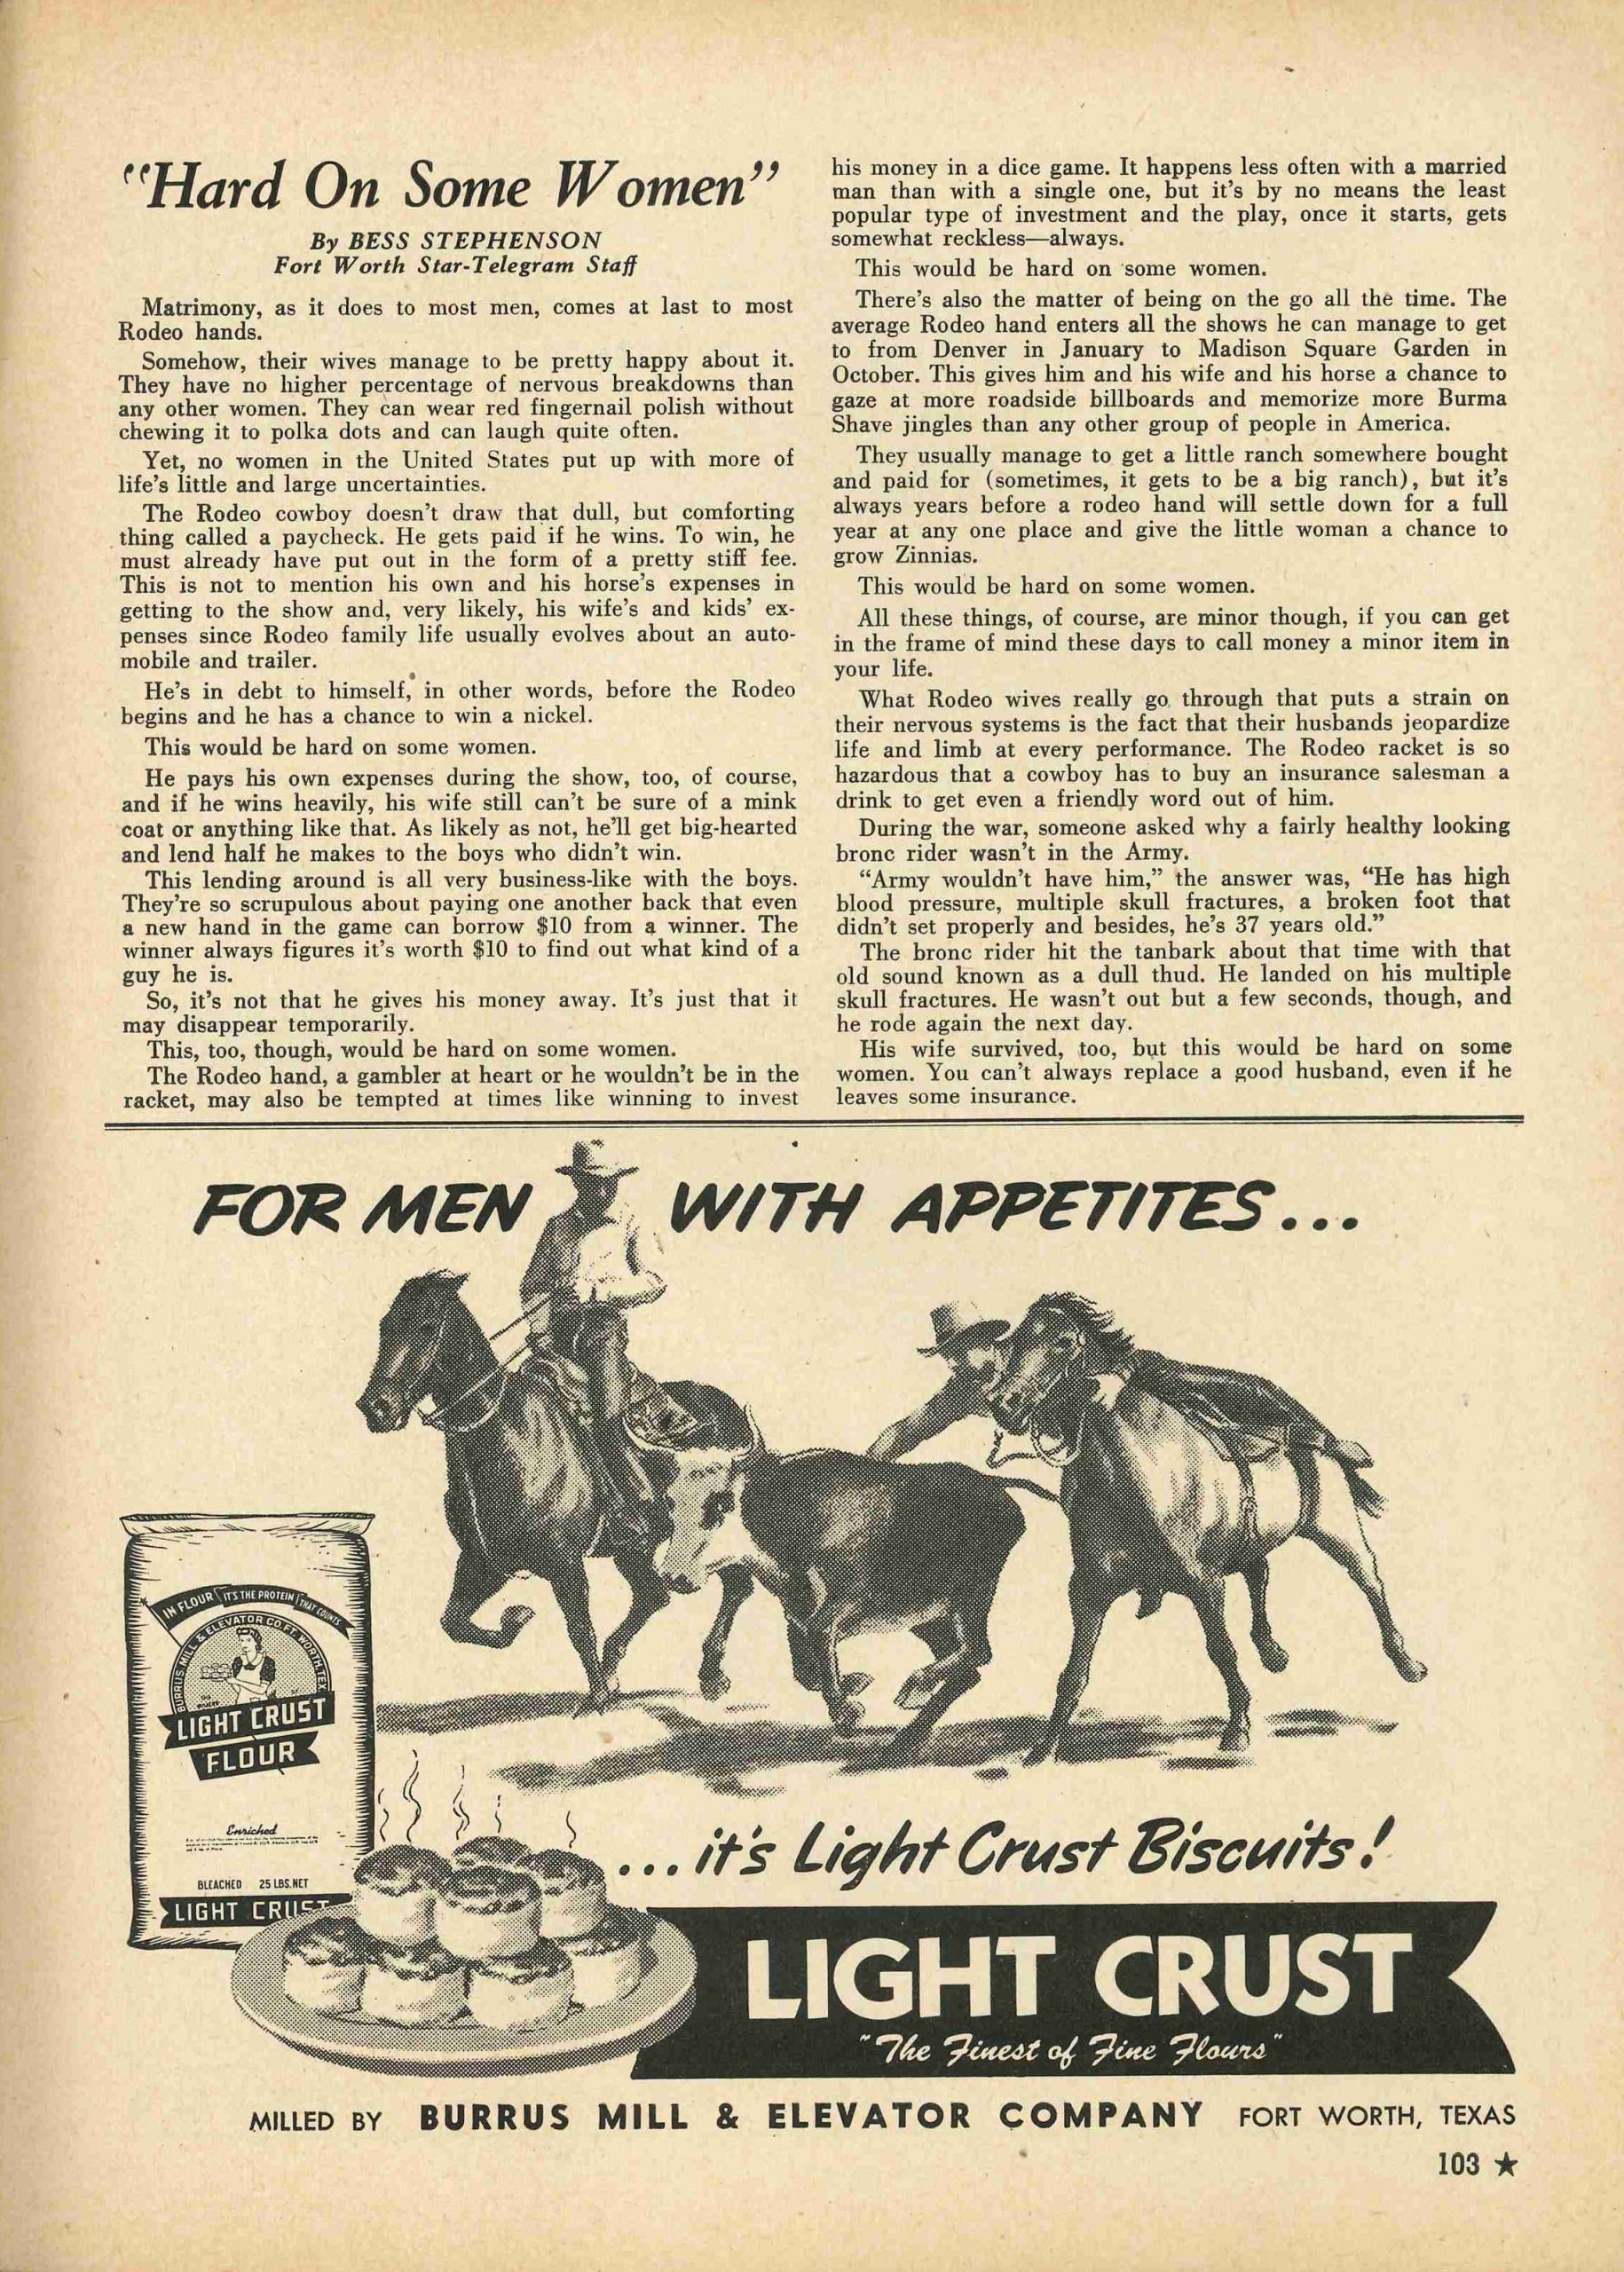 Page from stock show annual with essay about challenges for women in rodeo